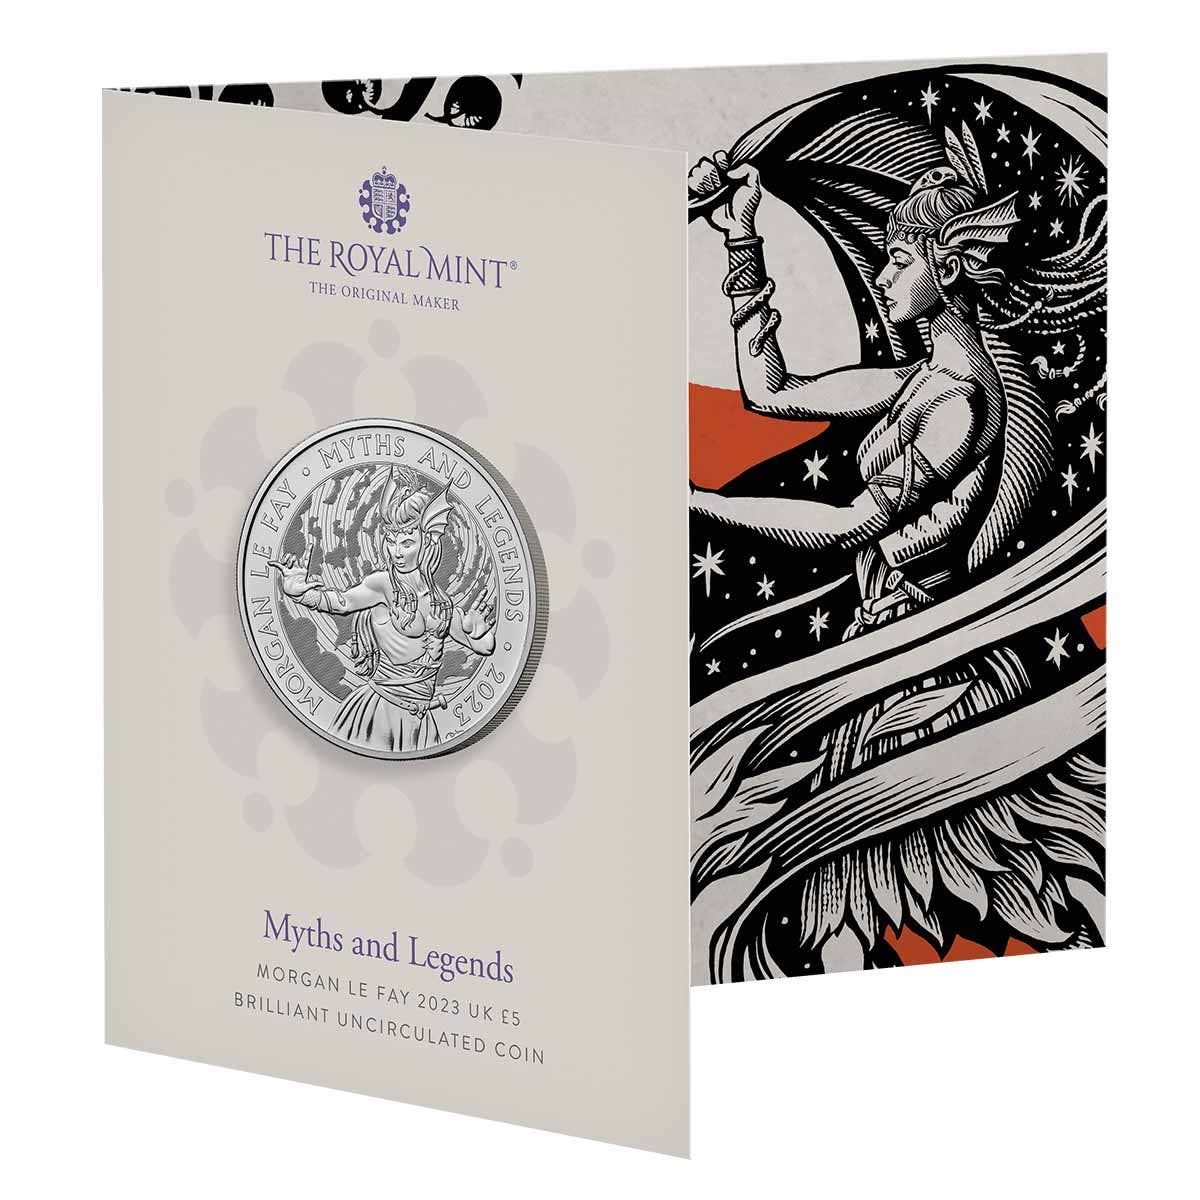 Myths and Legends Morgan Le Fay 2023 UK £5 Brilliant Uncirculated Coin